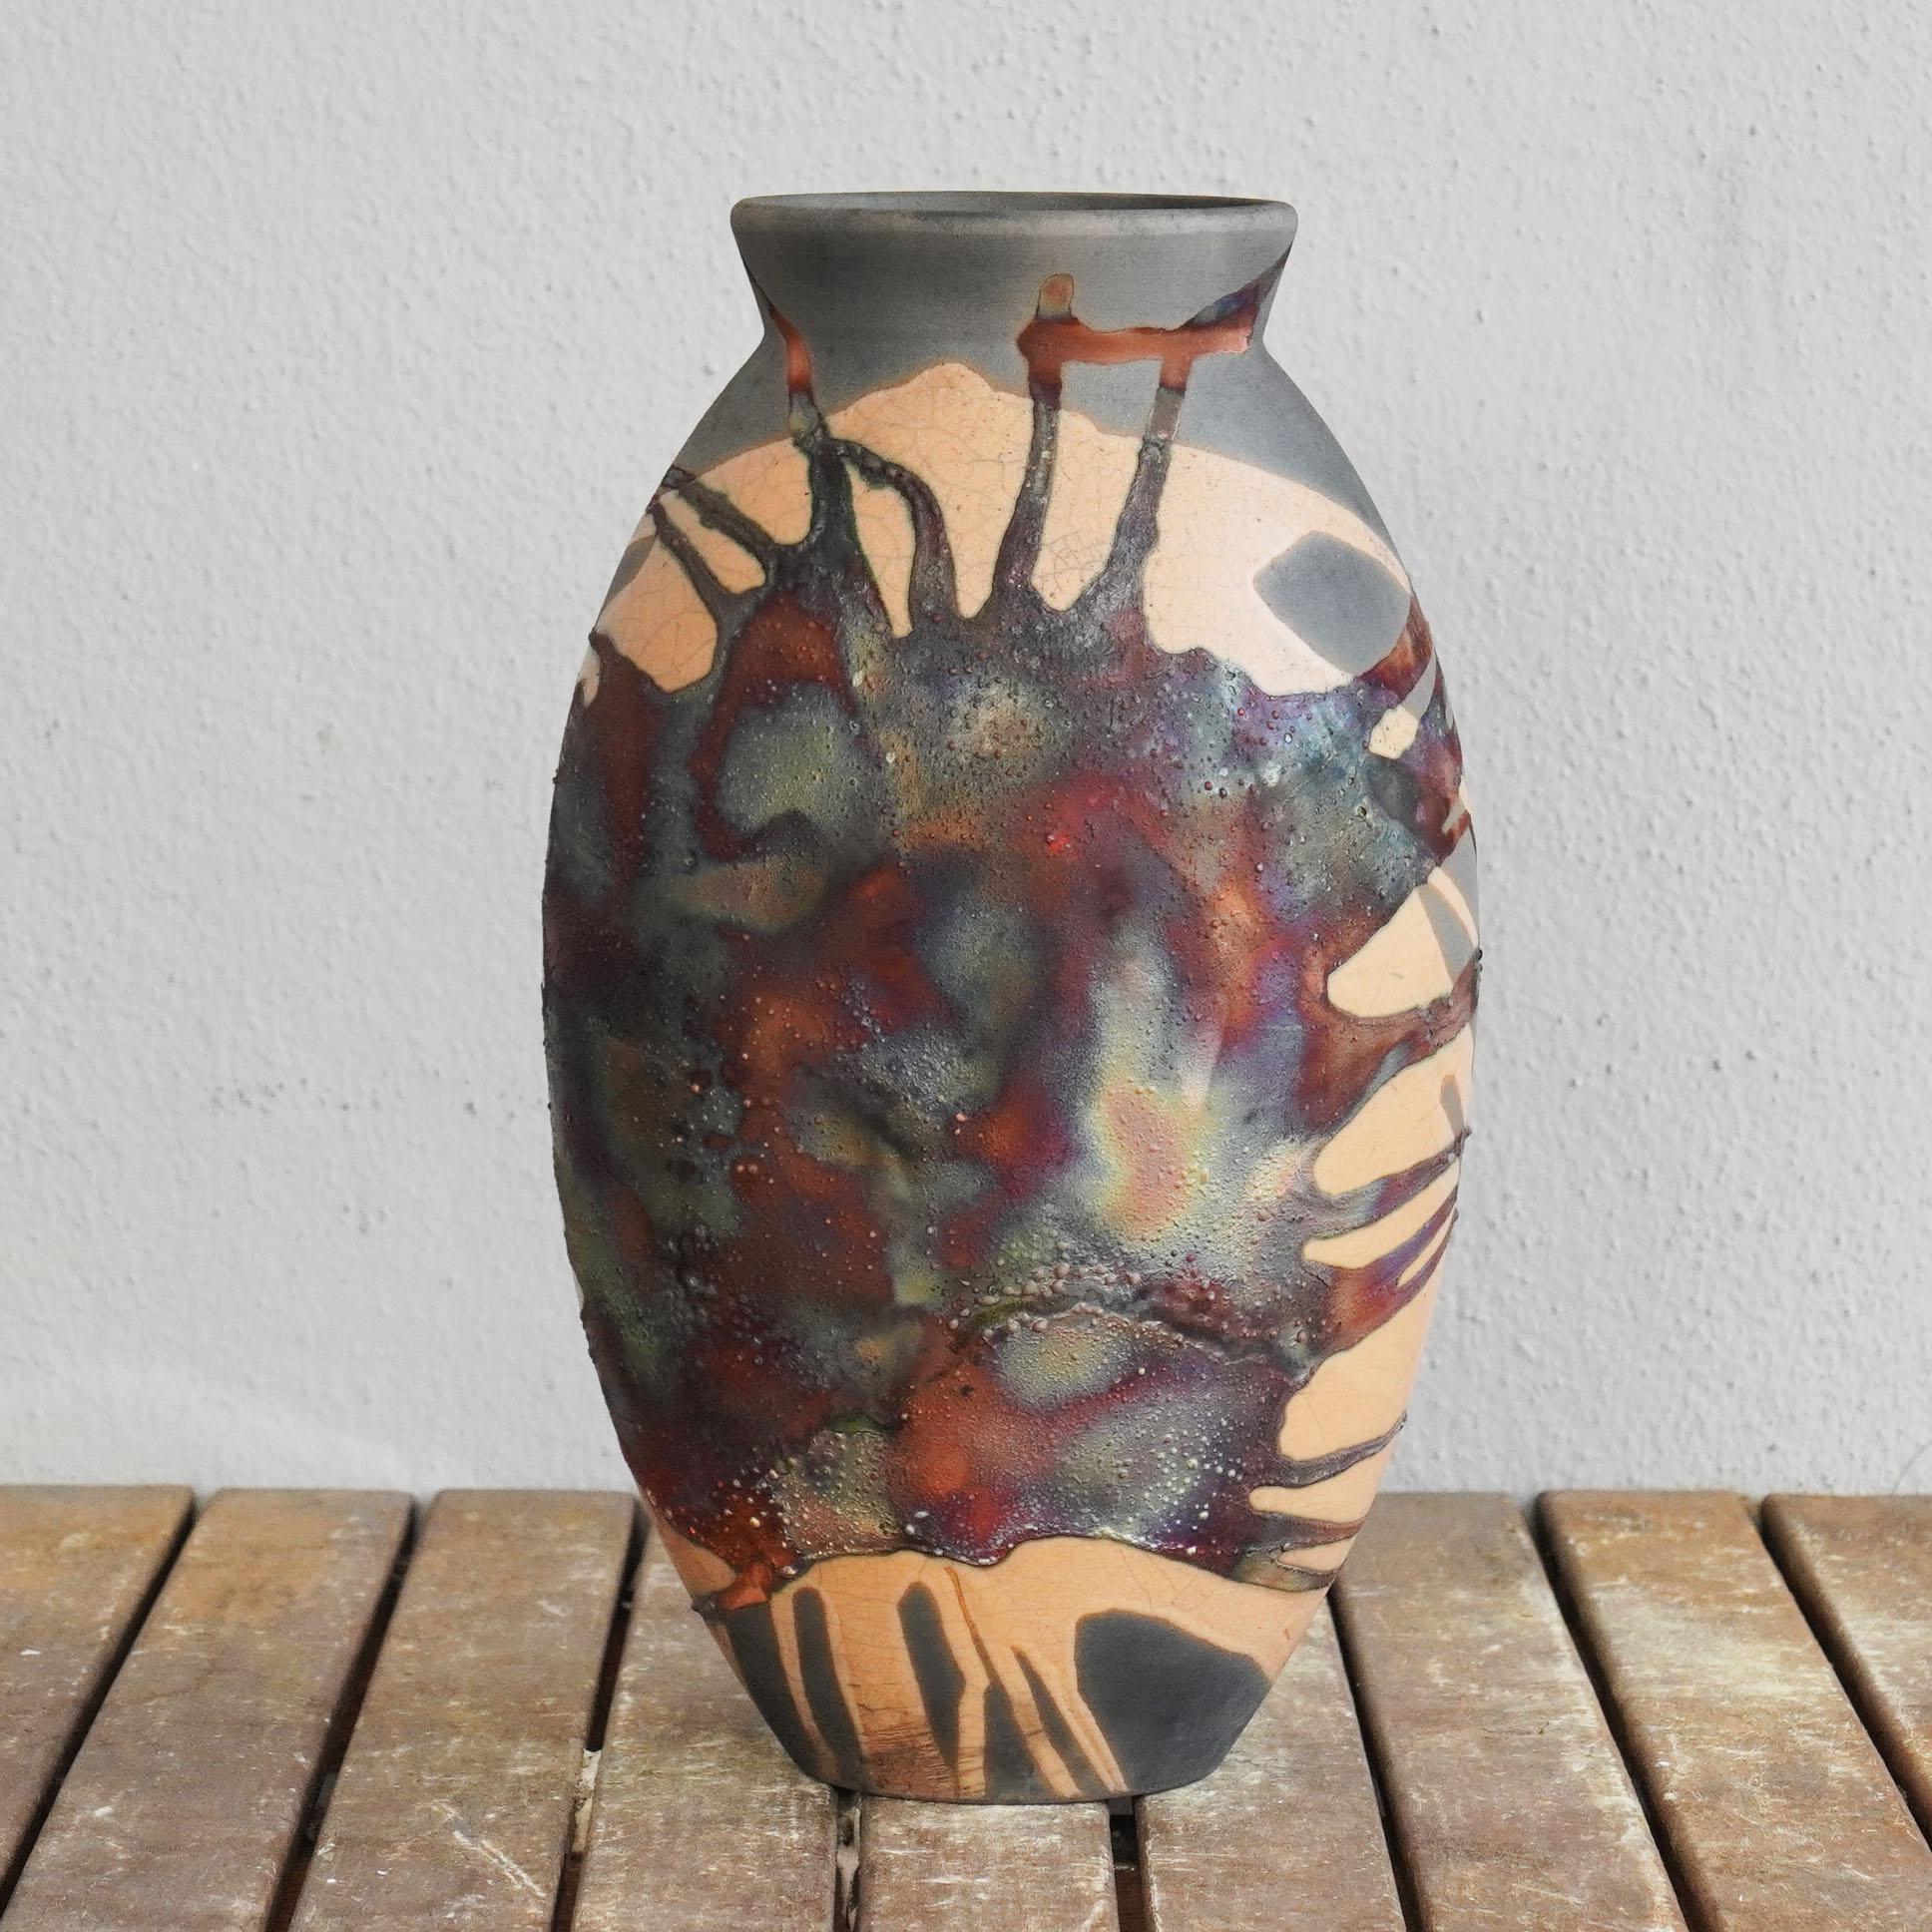 A mesmerizing sight to behold as soon as the rainbow-like patinas catch your eye. The Oval Vase is a tall, teardrop-shaped design best for adding a touch of elegance and intrigue to an interior space. Made using the Raku technique, it easily becomes